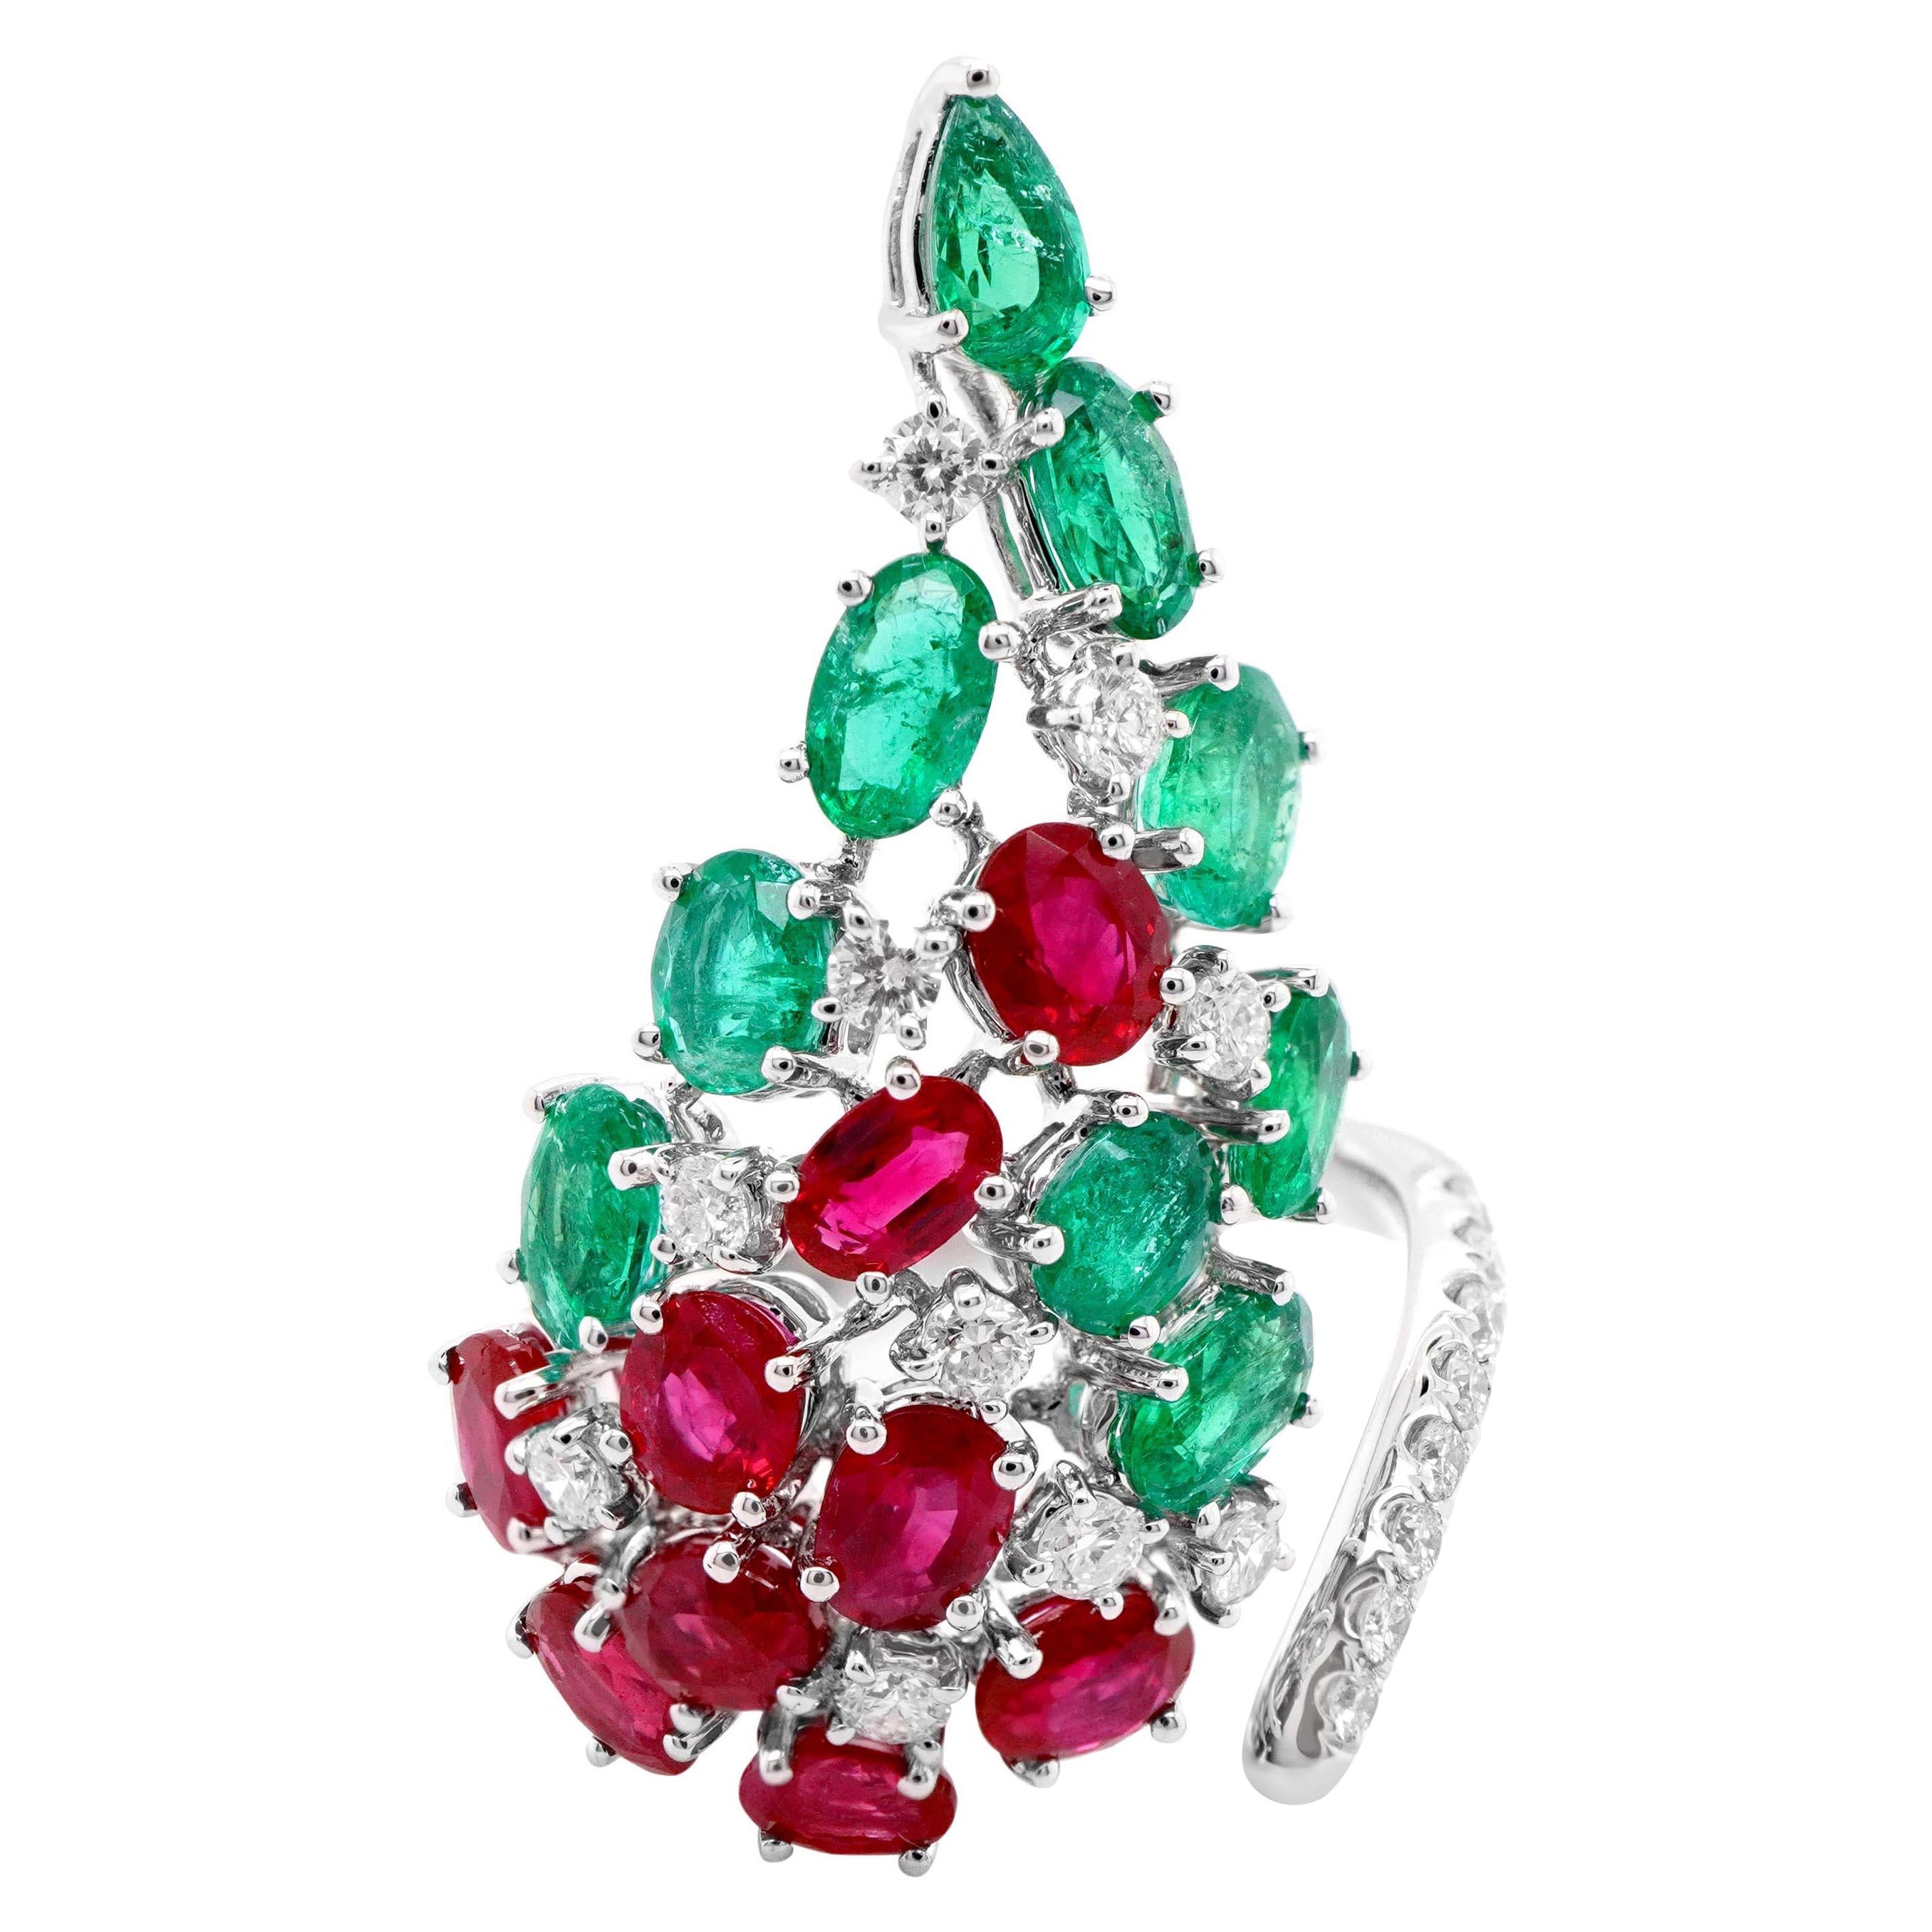 3.88 Carat Vivid Red Burma Ruby Colombian Emerald Christmas Color Cocktail Ring For Sale